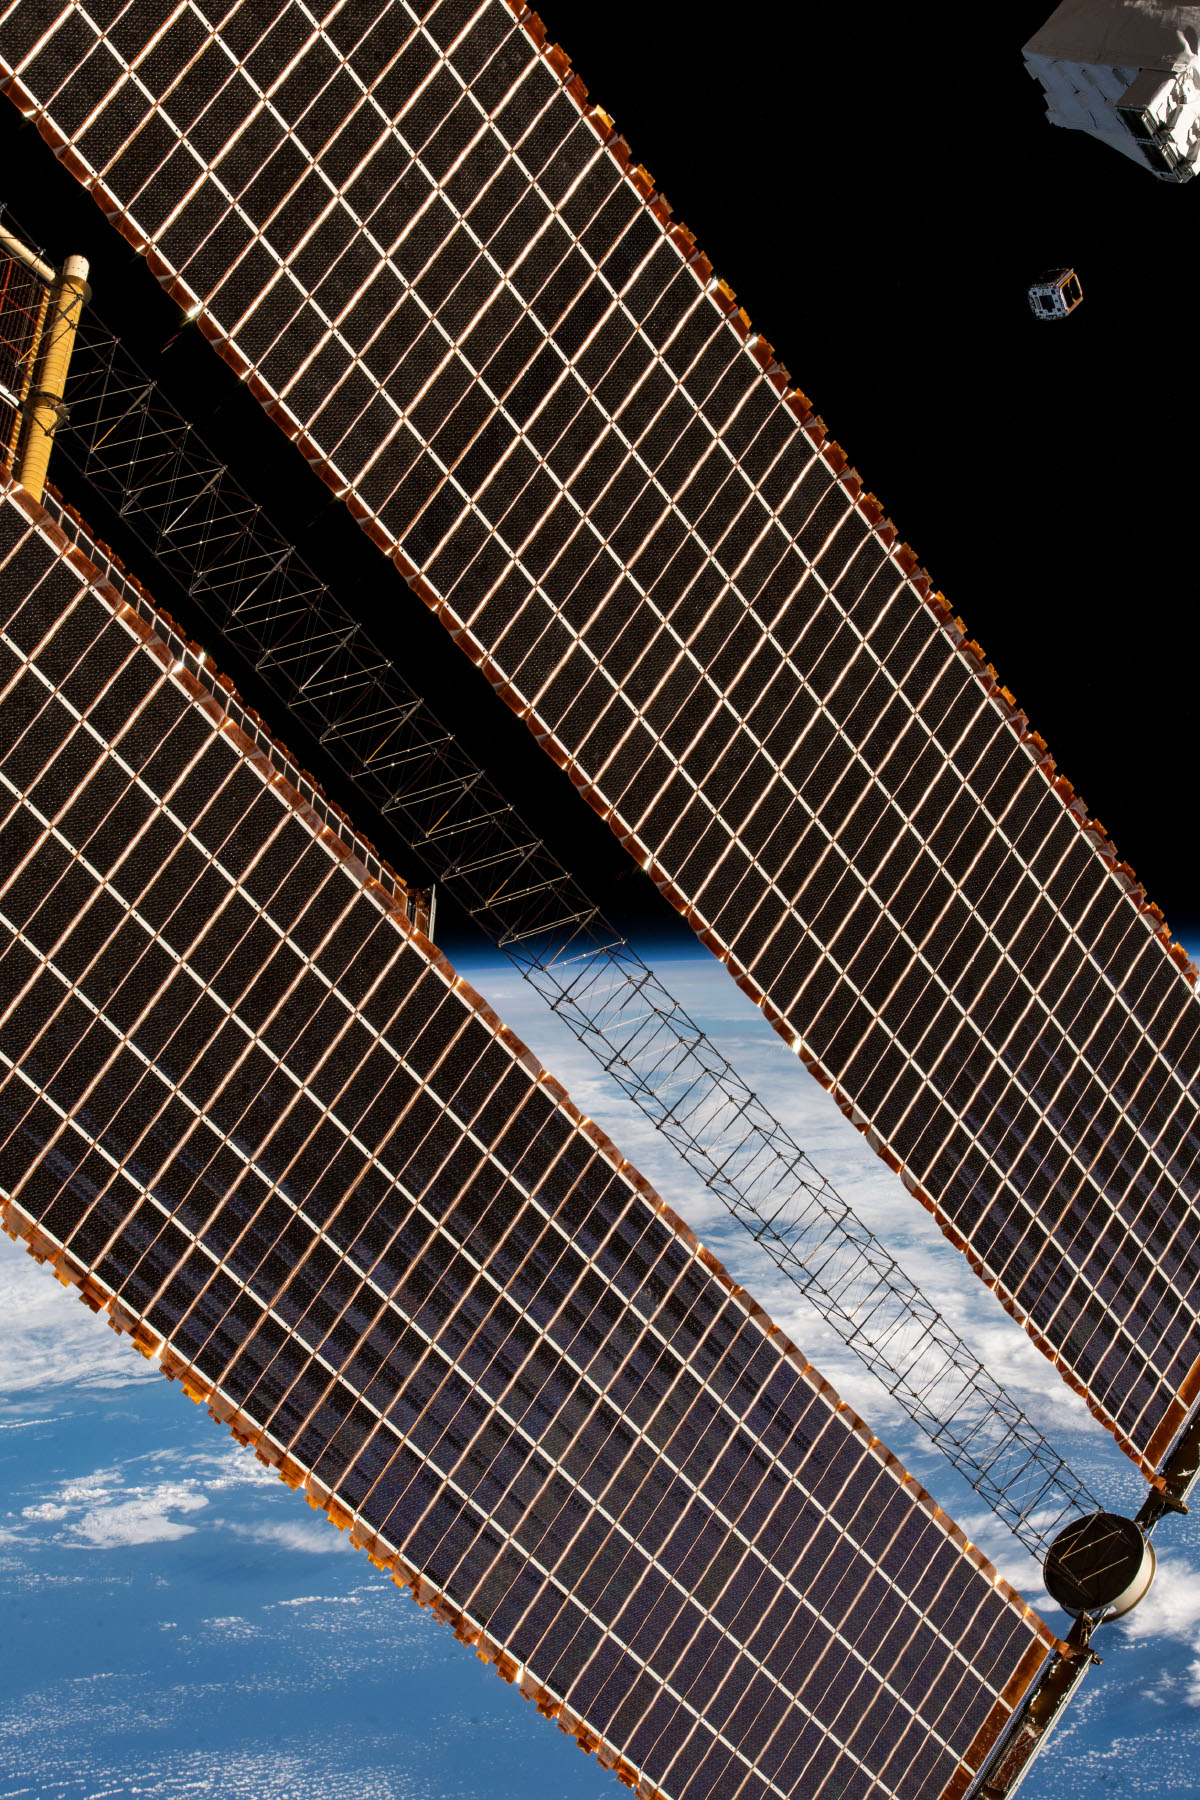 Solar arrays from the International Space Station with a CubeSat in the distance